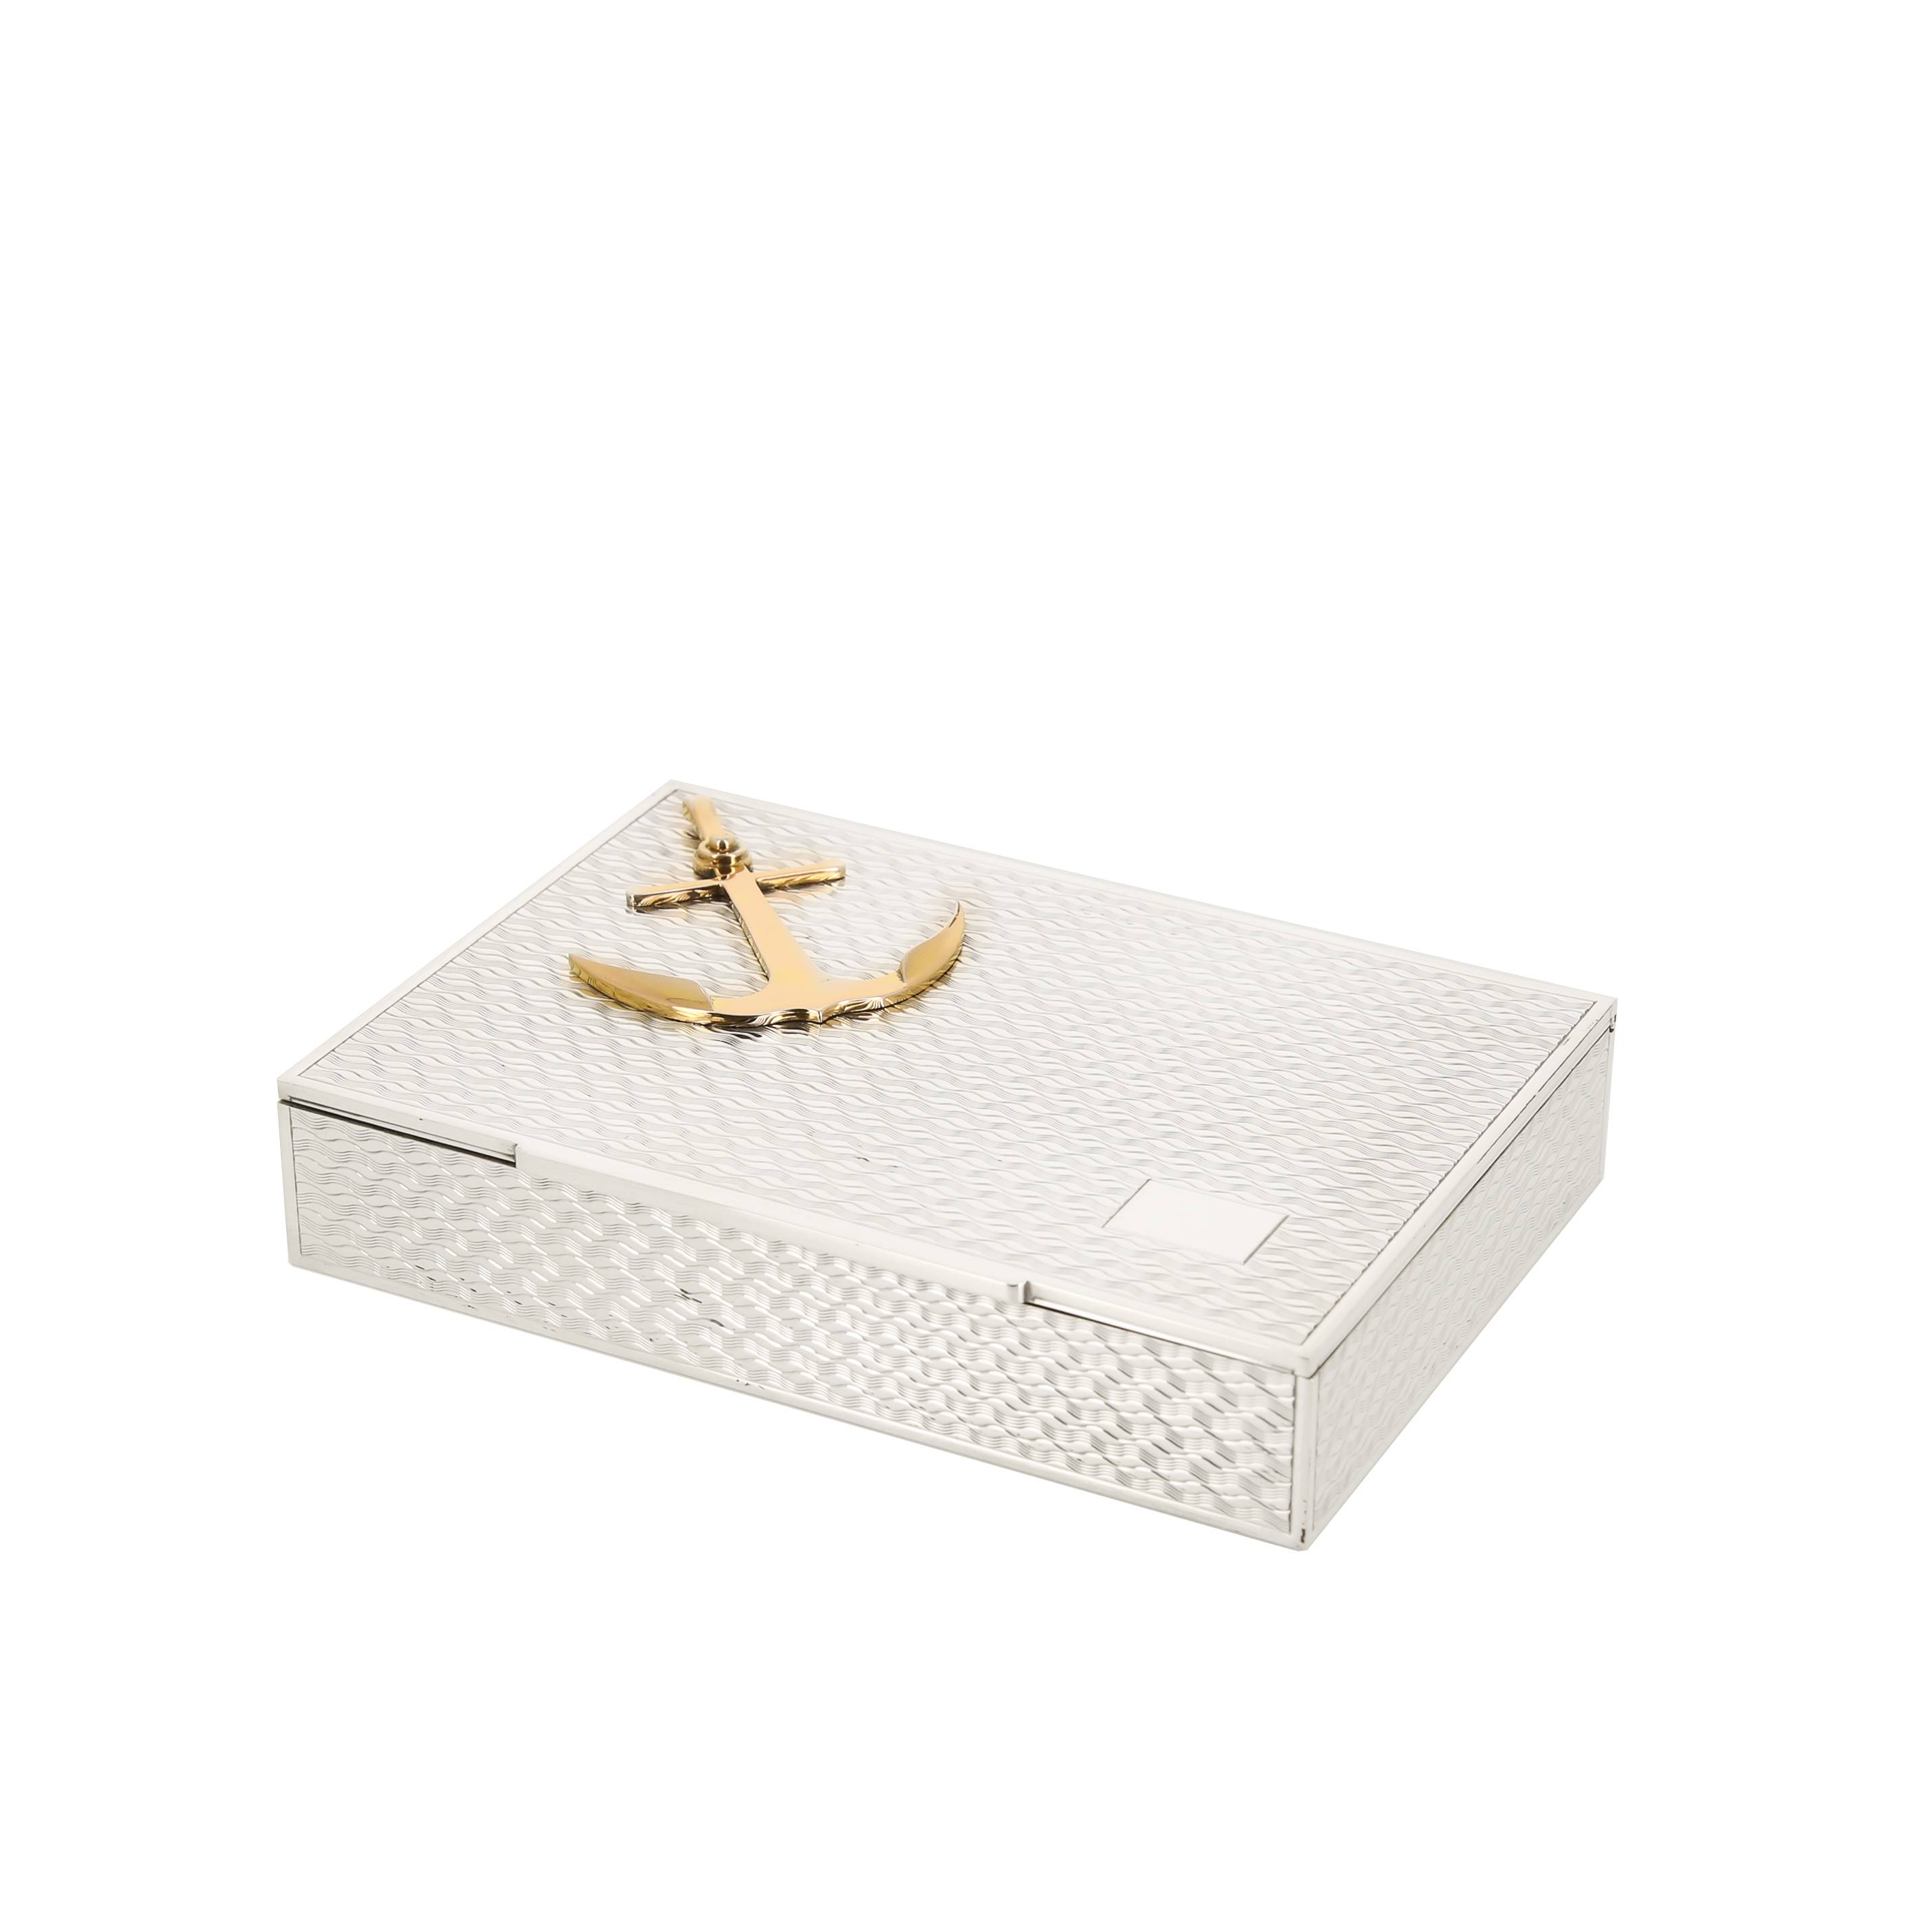 Hermès, rectangular box in guilloche silver with marine anchor decoration in vermeil, 1970s - 00pp